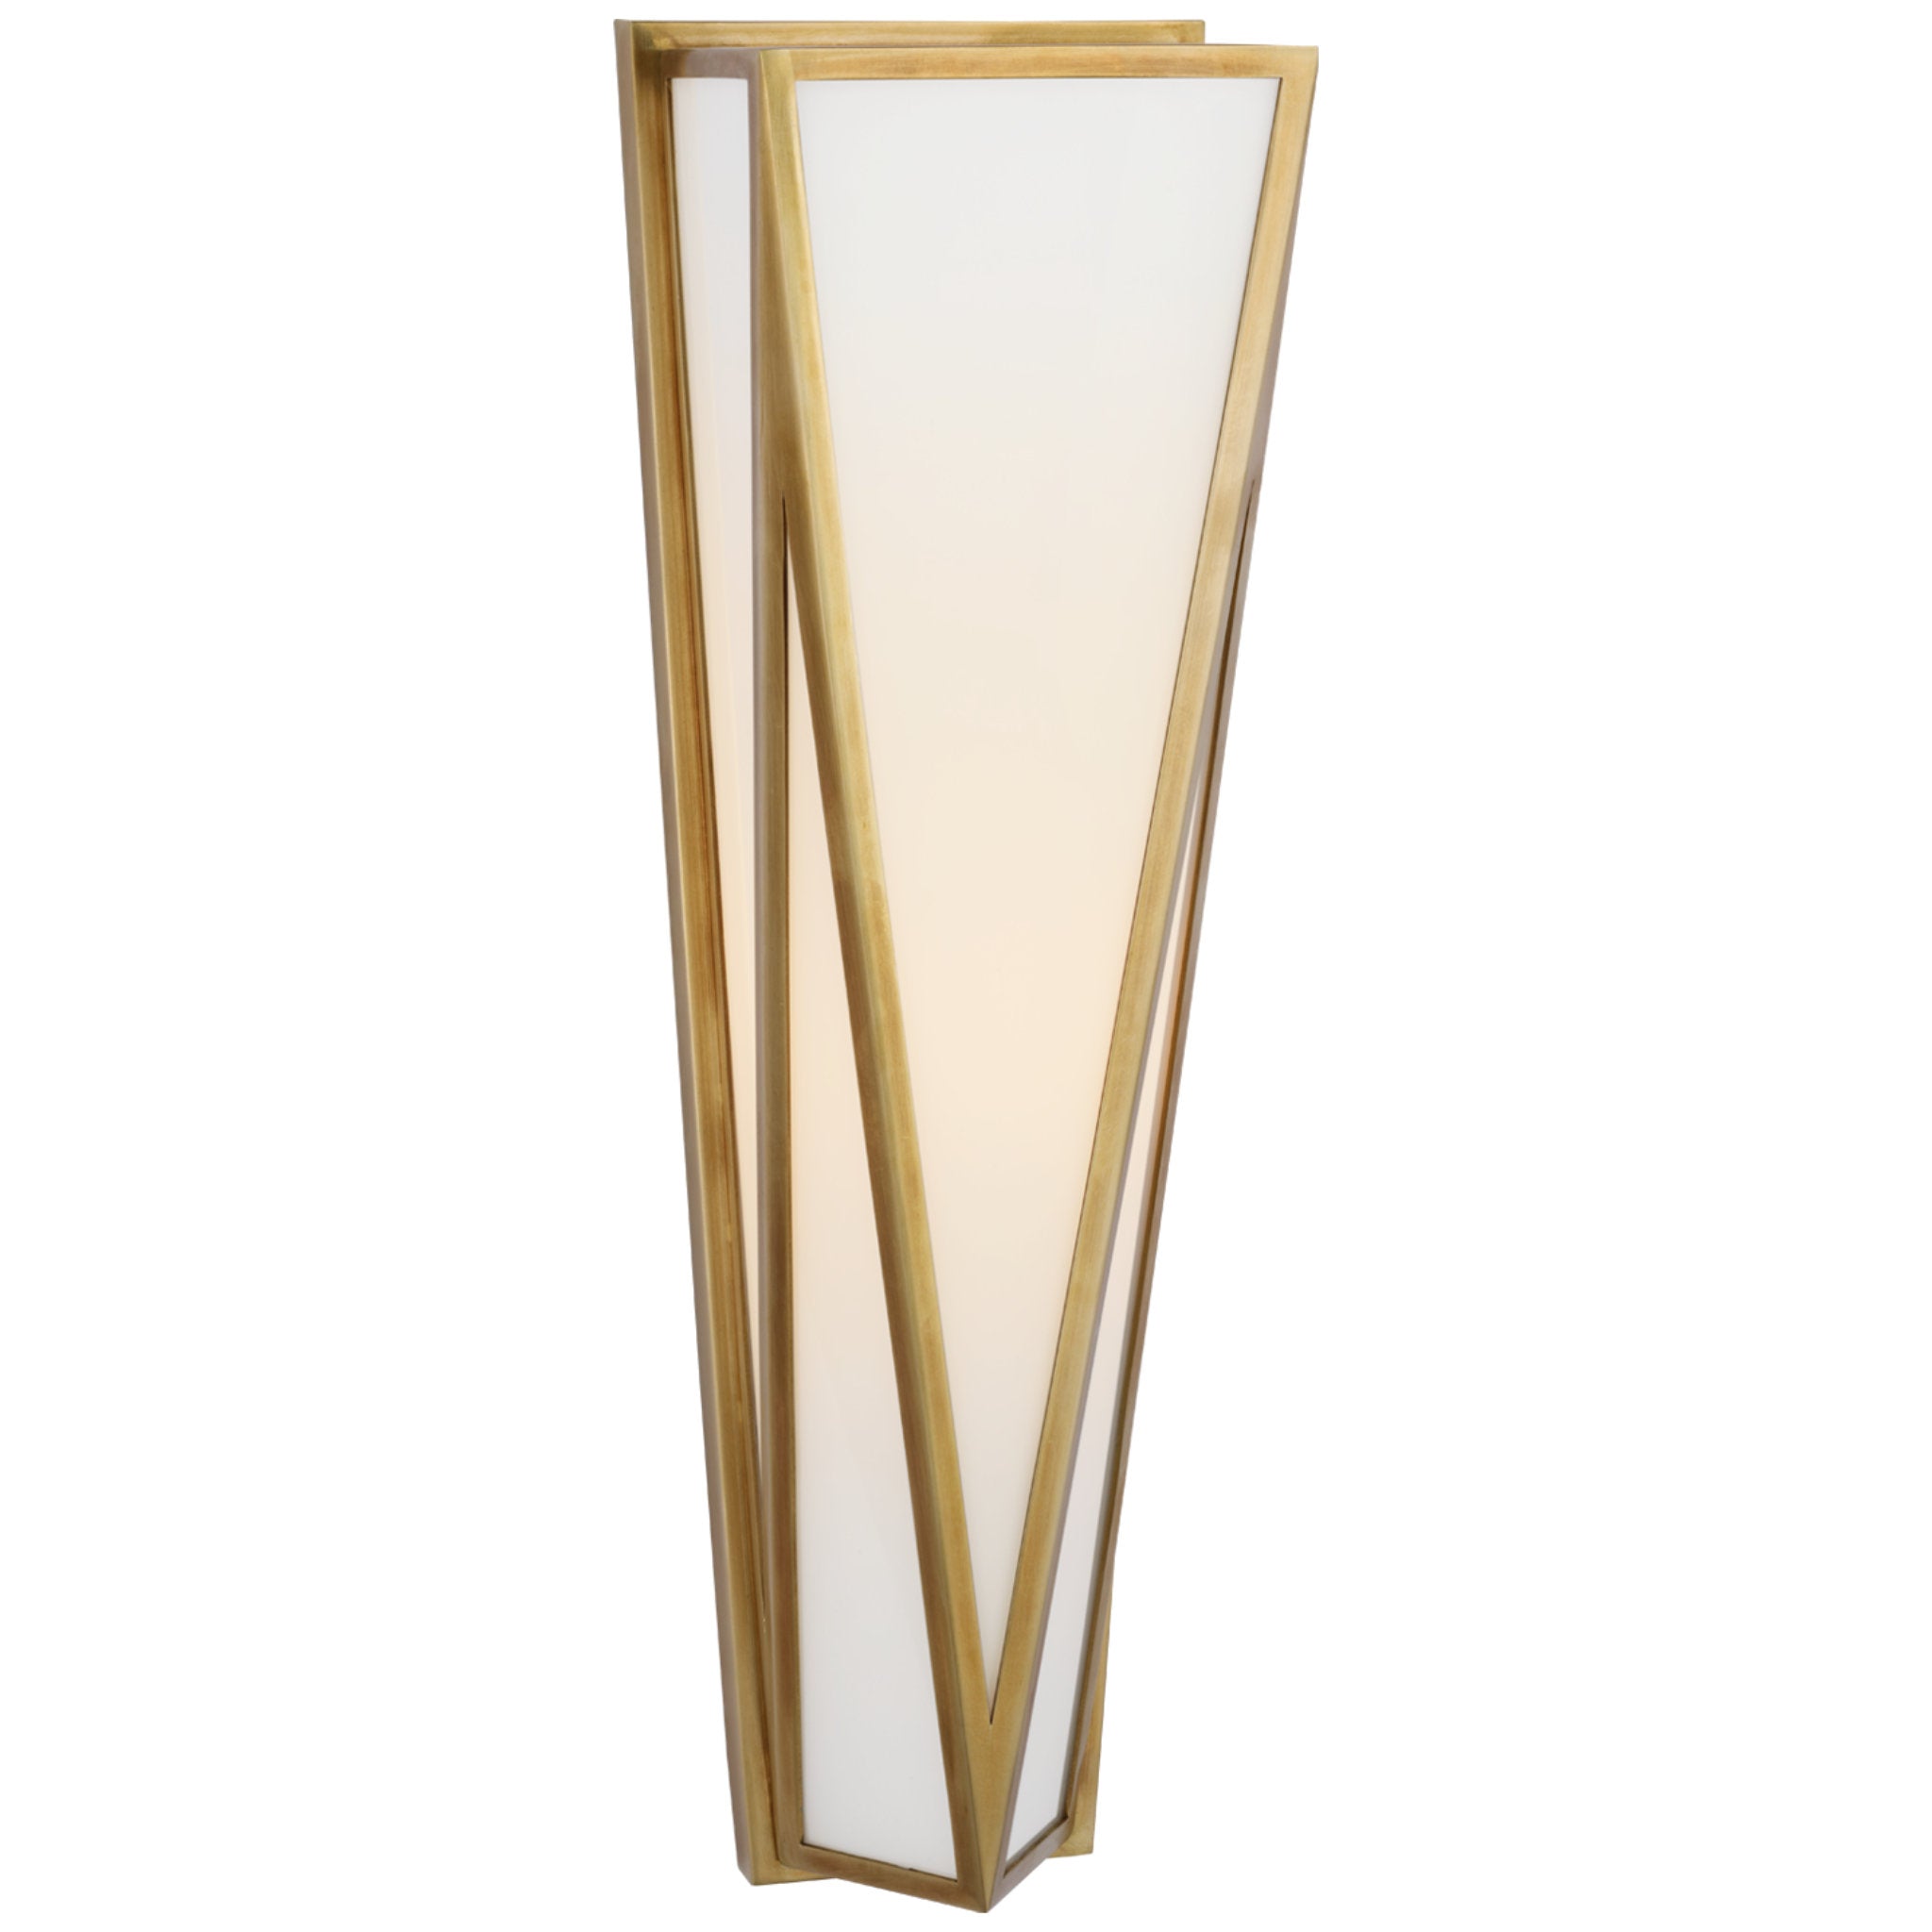 Julie Neill Lorino Medium Sconce in Hand-Rubbed Antique Brass with White Glass